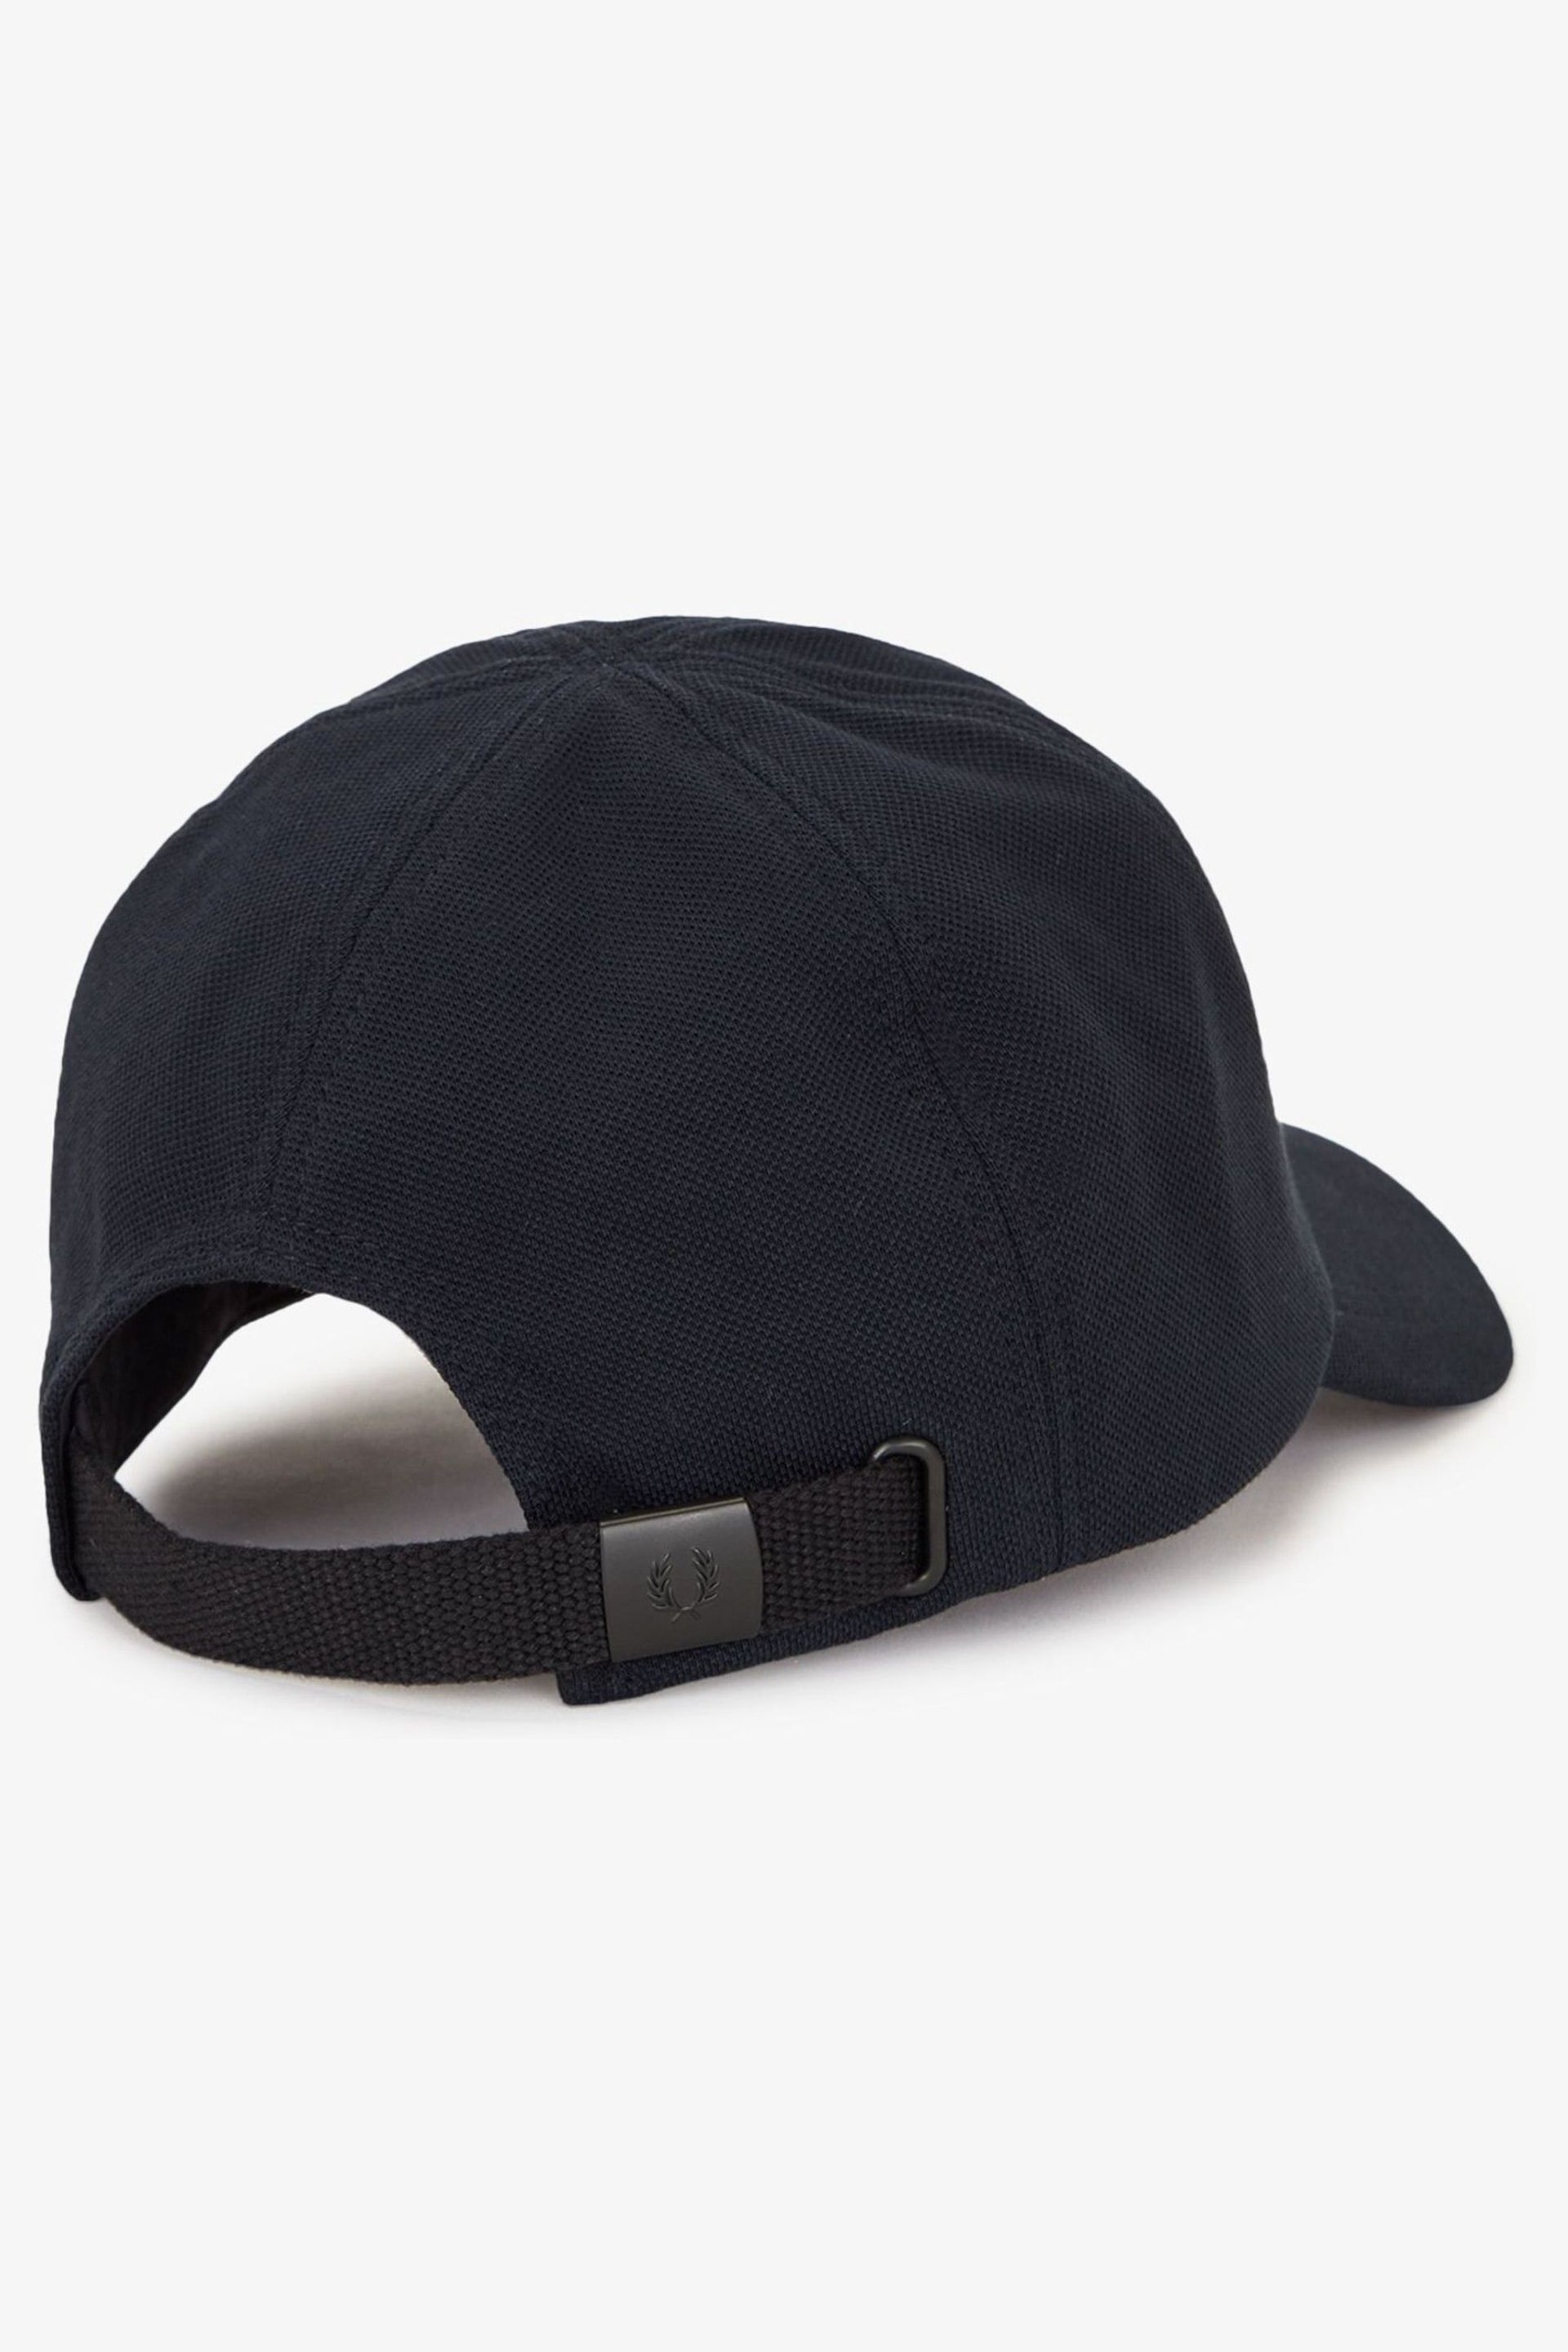 Fred Perry Cotton Pique Classic Cap - Image 2 of 6